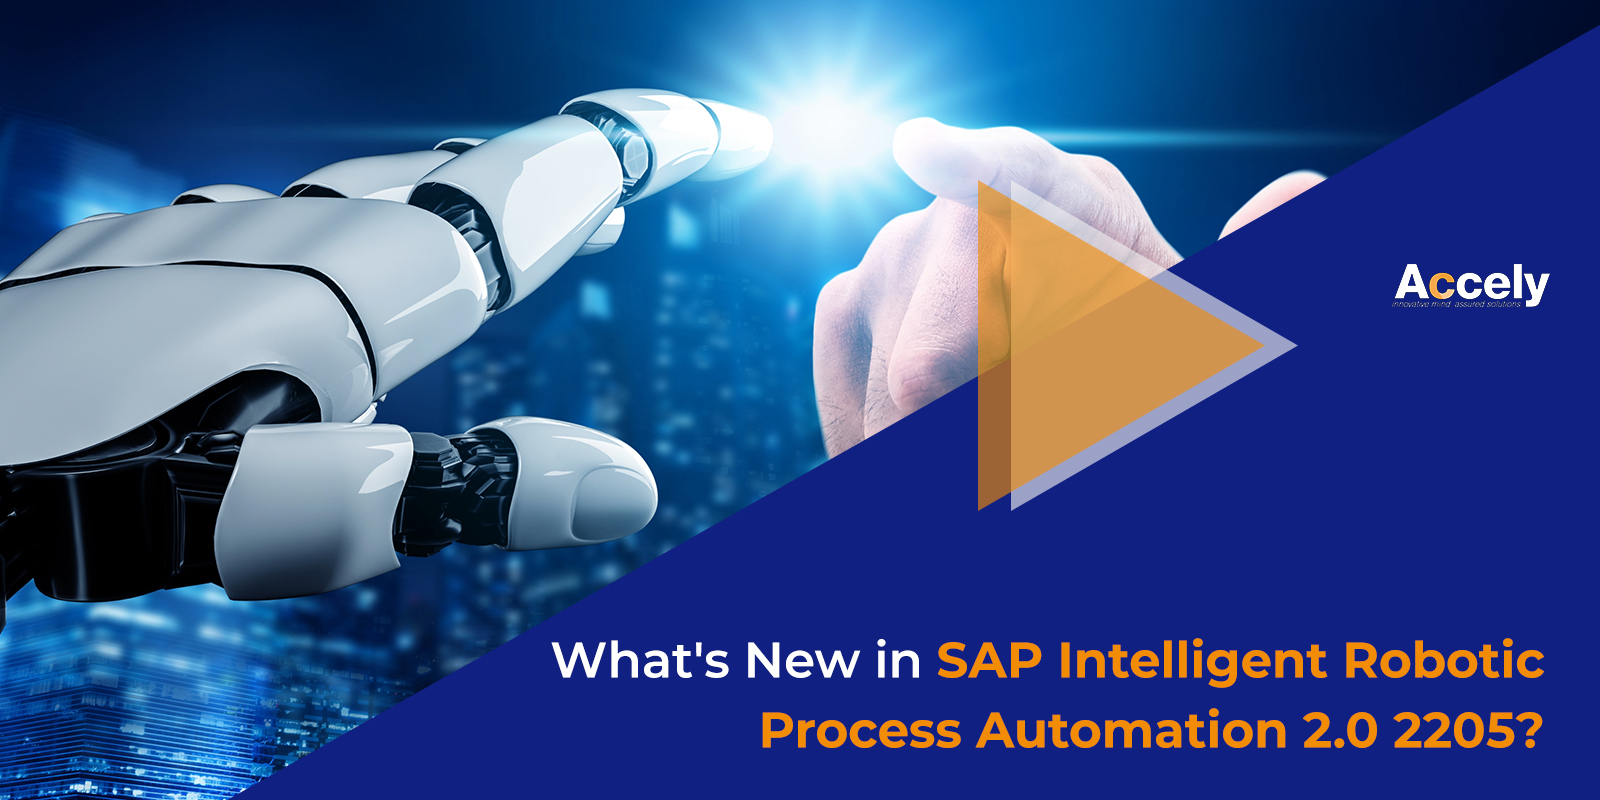 What's New in SAP Intelligent Robotic Process Automation 2.0 2205?